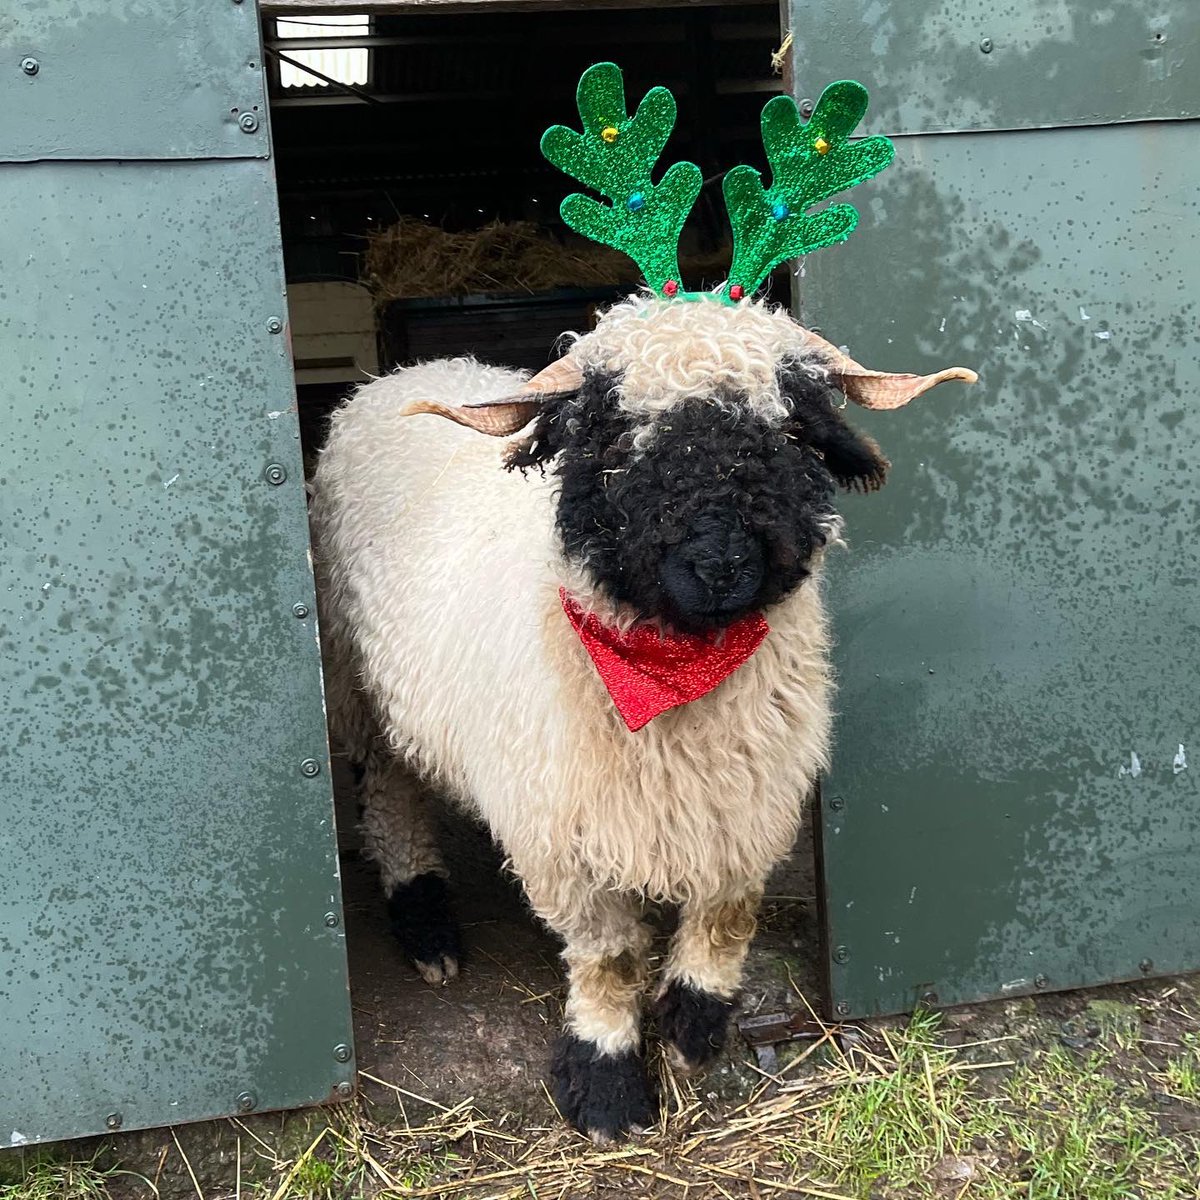 I managed to get Sassenach to stay away from me to get this pic so we could wish everyone who follows us, comments, shares and supports our little business a very Merry Christmas! Merry Christmas everyone ❤️ #arnbegfarmstayscotland #lovemysheep #petsheep